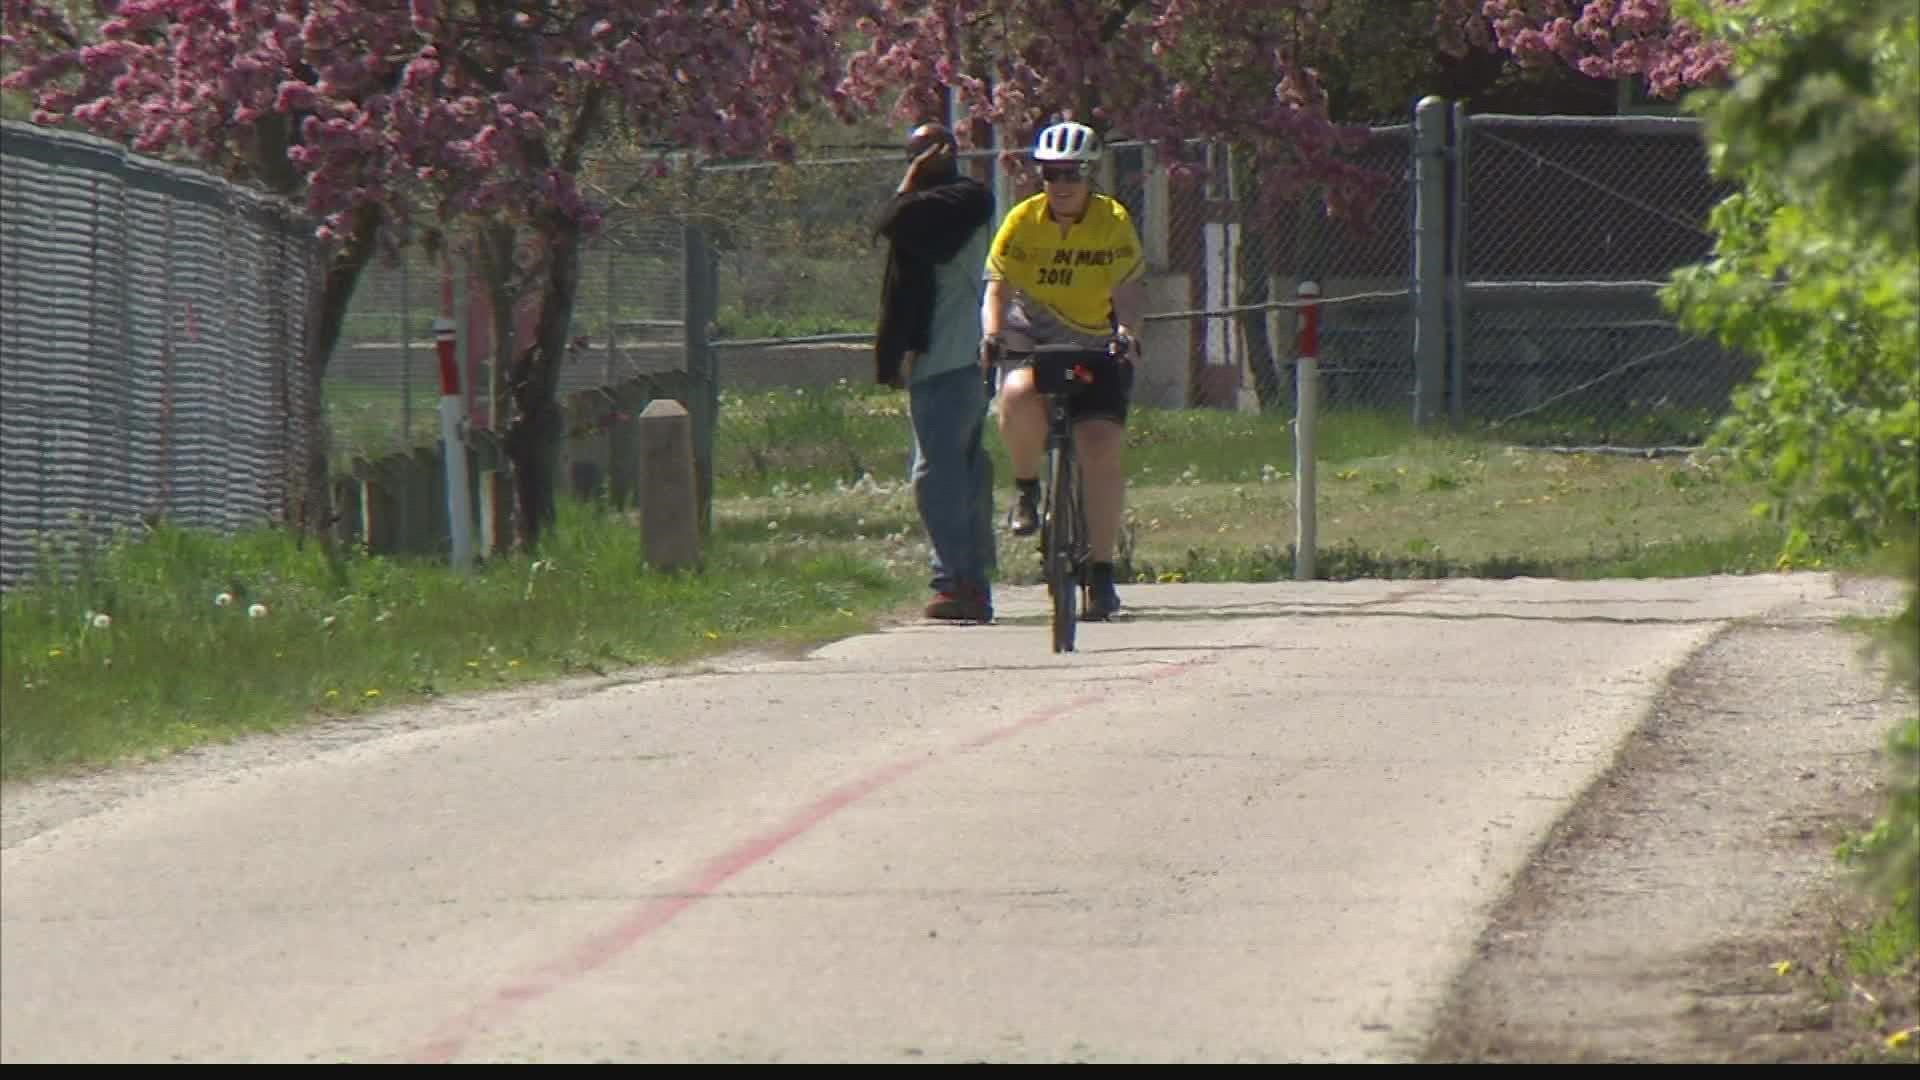 The City of Indianapolis is working to make the city's trails and greenways better.